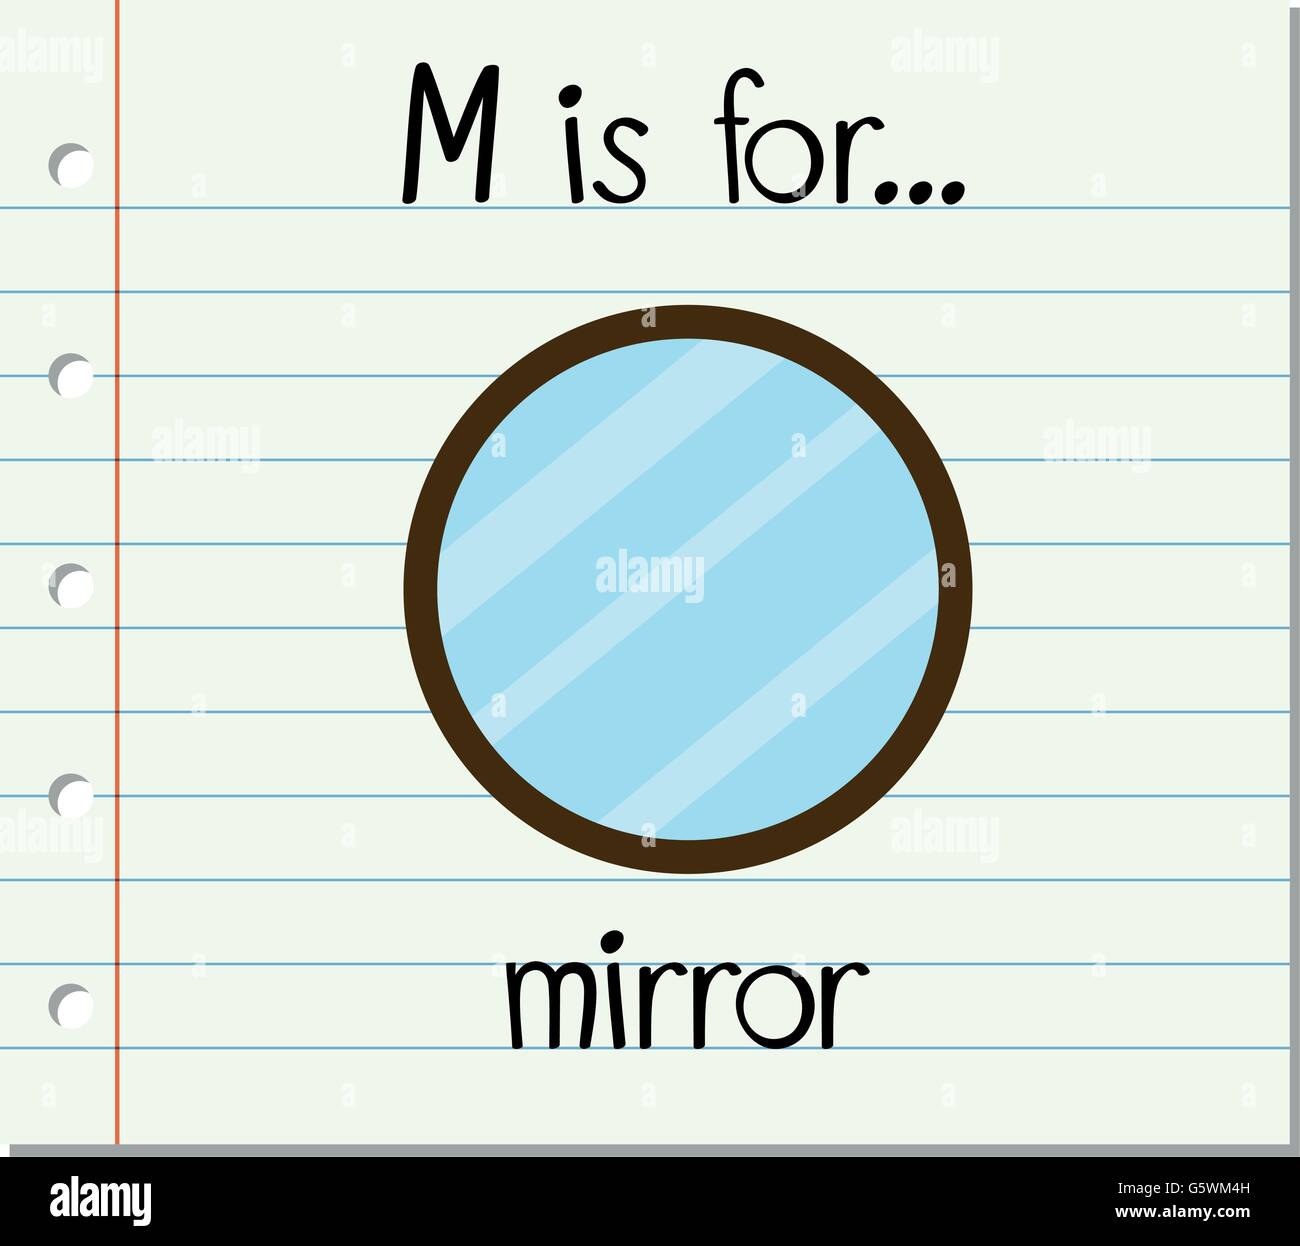 Flashcard letter M is for mirror illustration Stock Vector